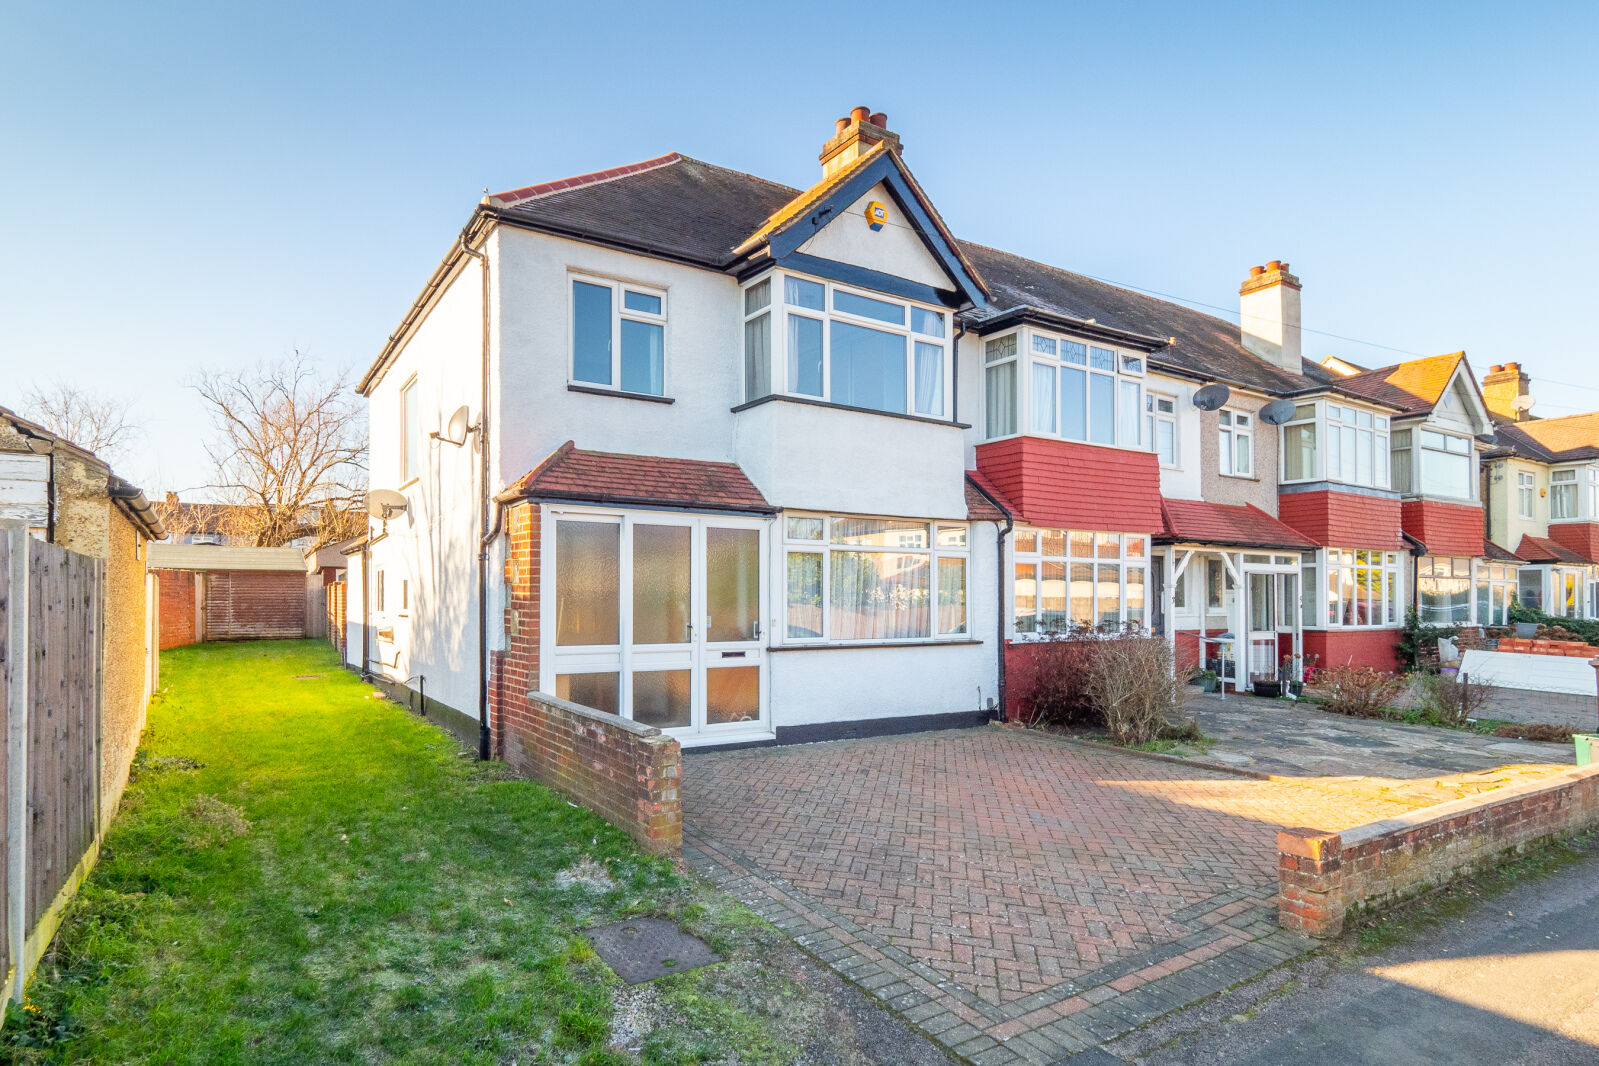 3 bedroom end terraced house for sale Priory Crescent, Cheam, SM3, main image